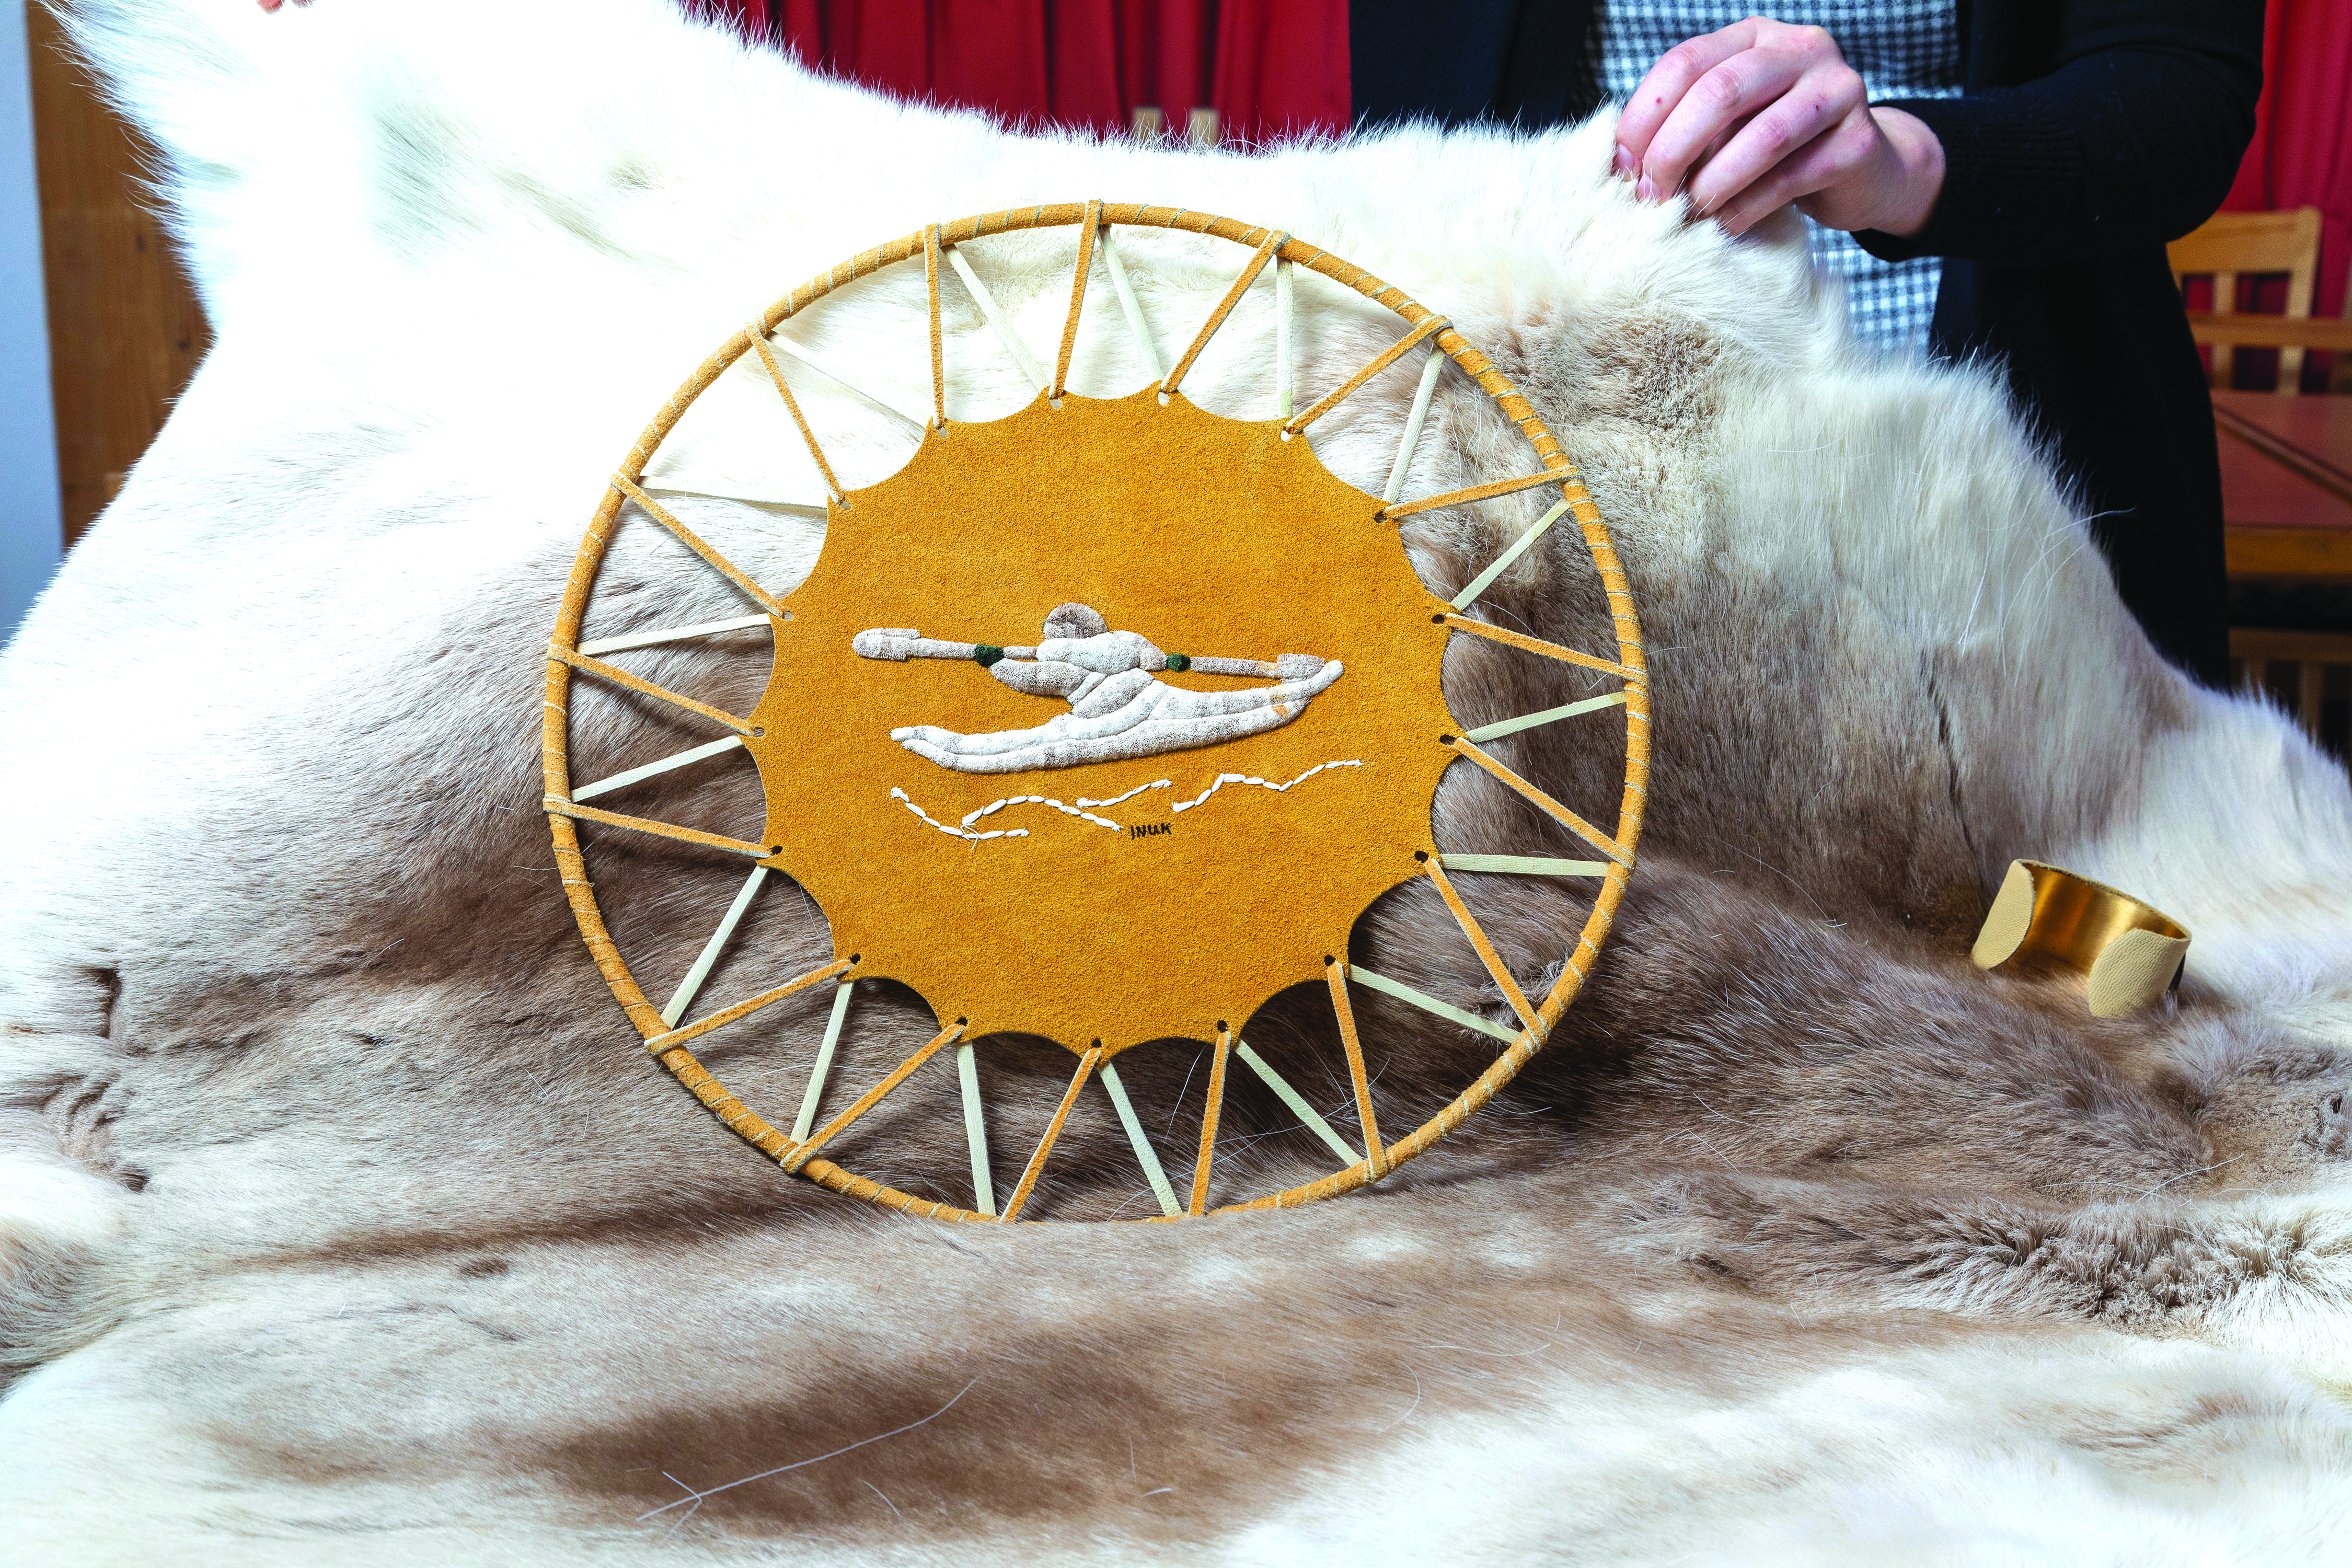 One of Inuk's tuftings depicting a kayak. 